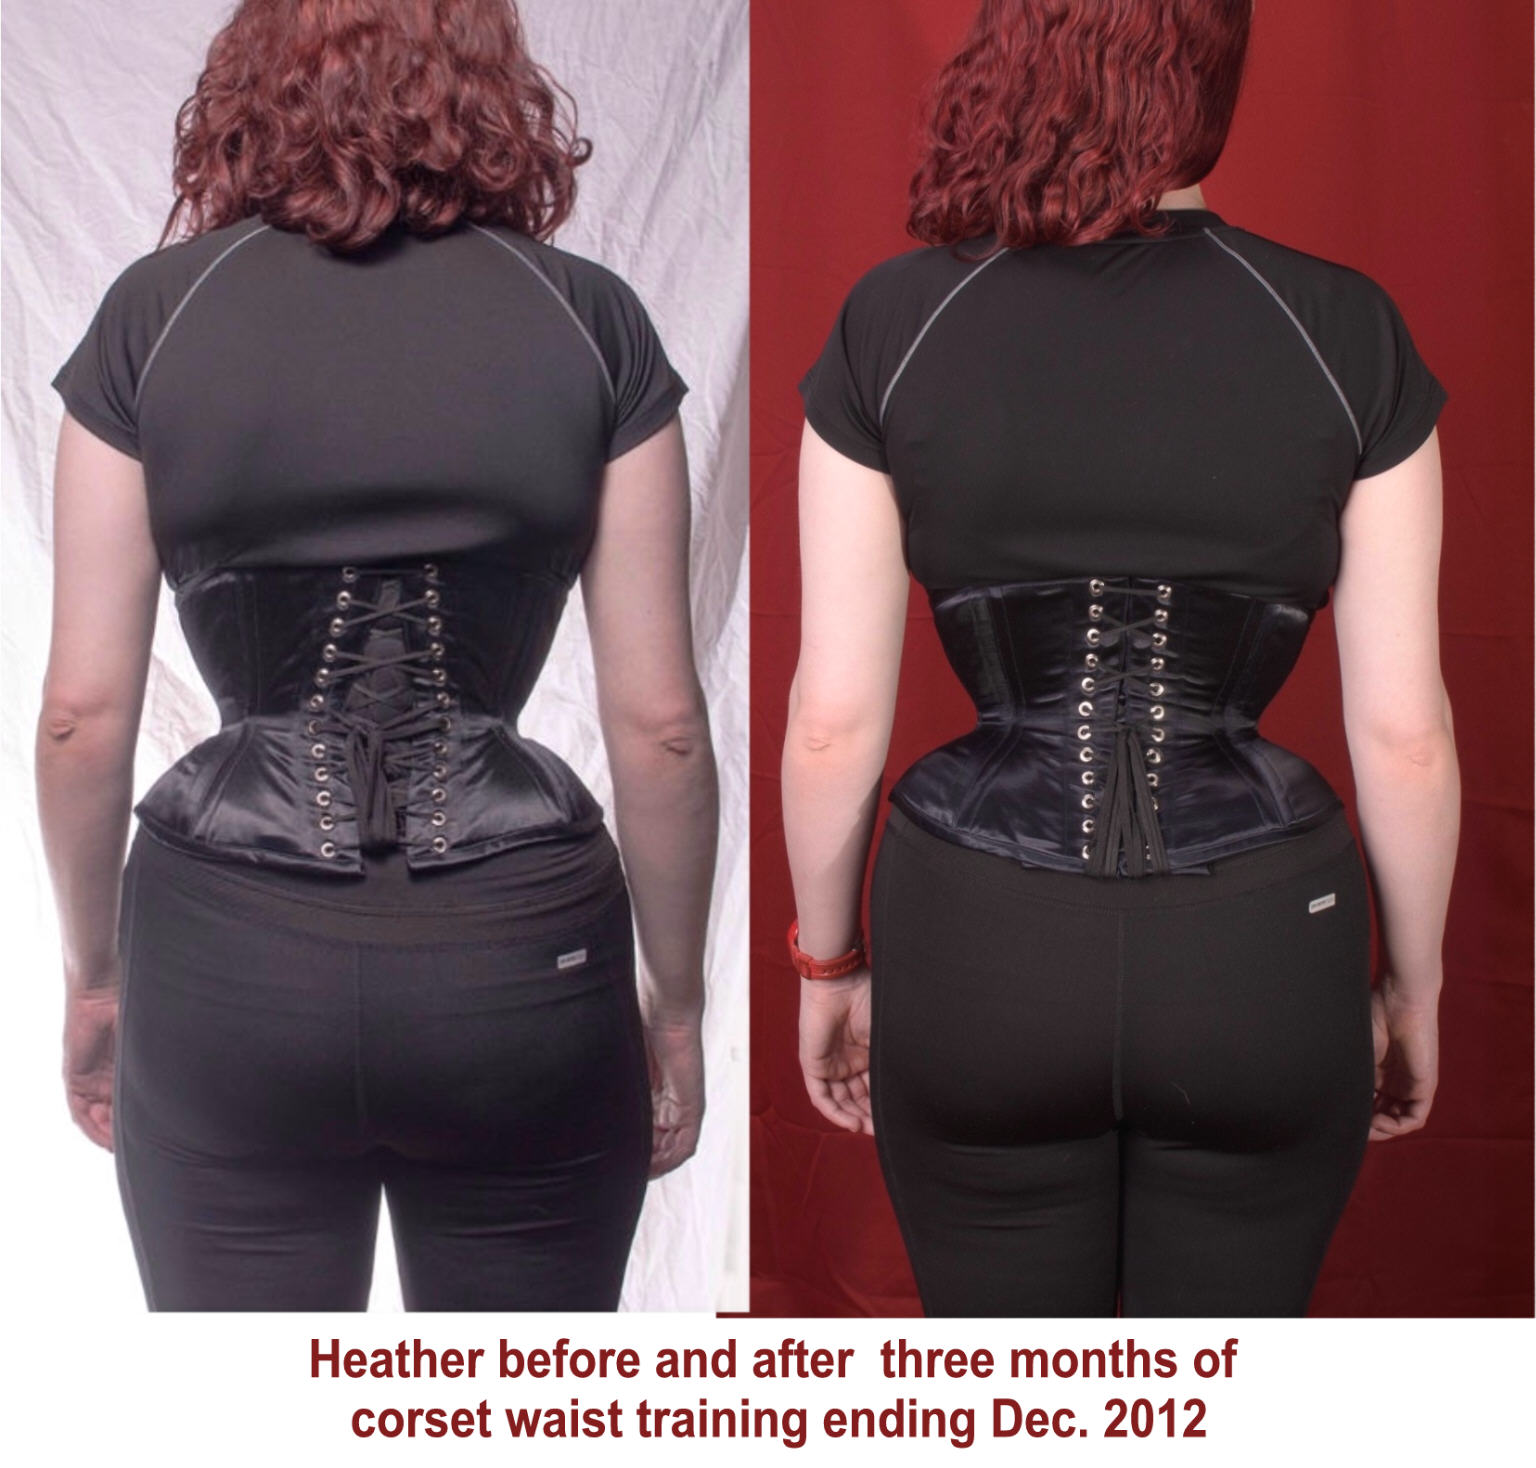 The Corset Diet” — and other troubling approaches to figure reshaping